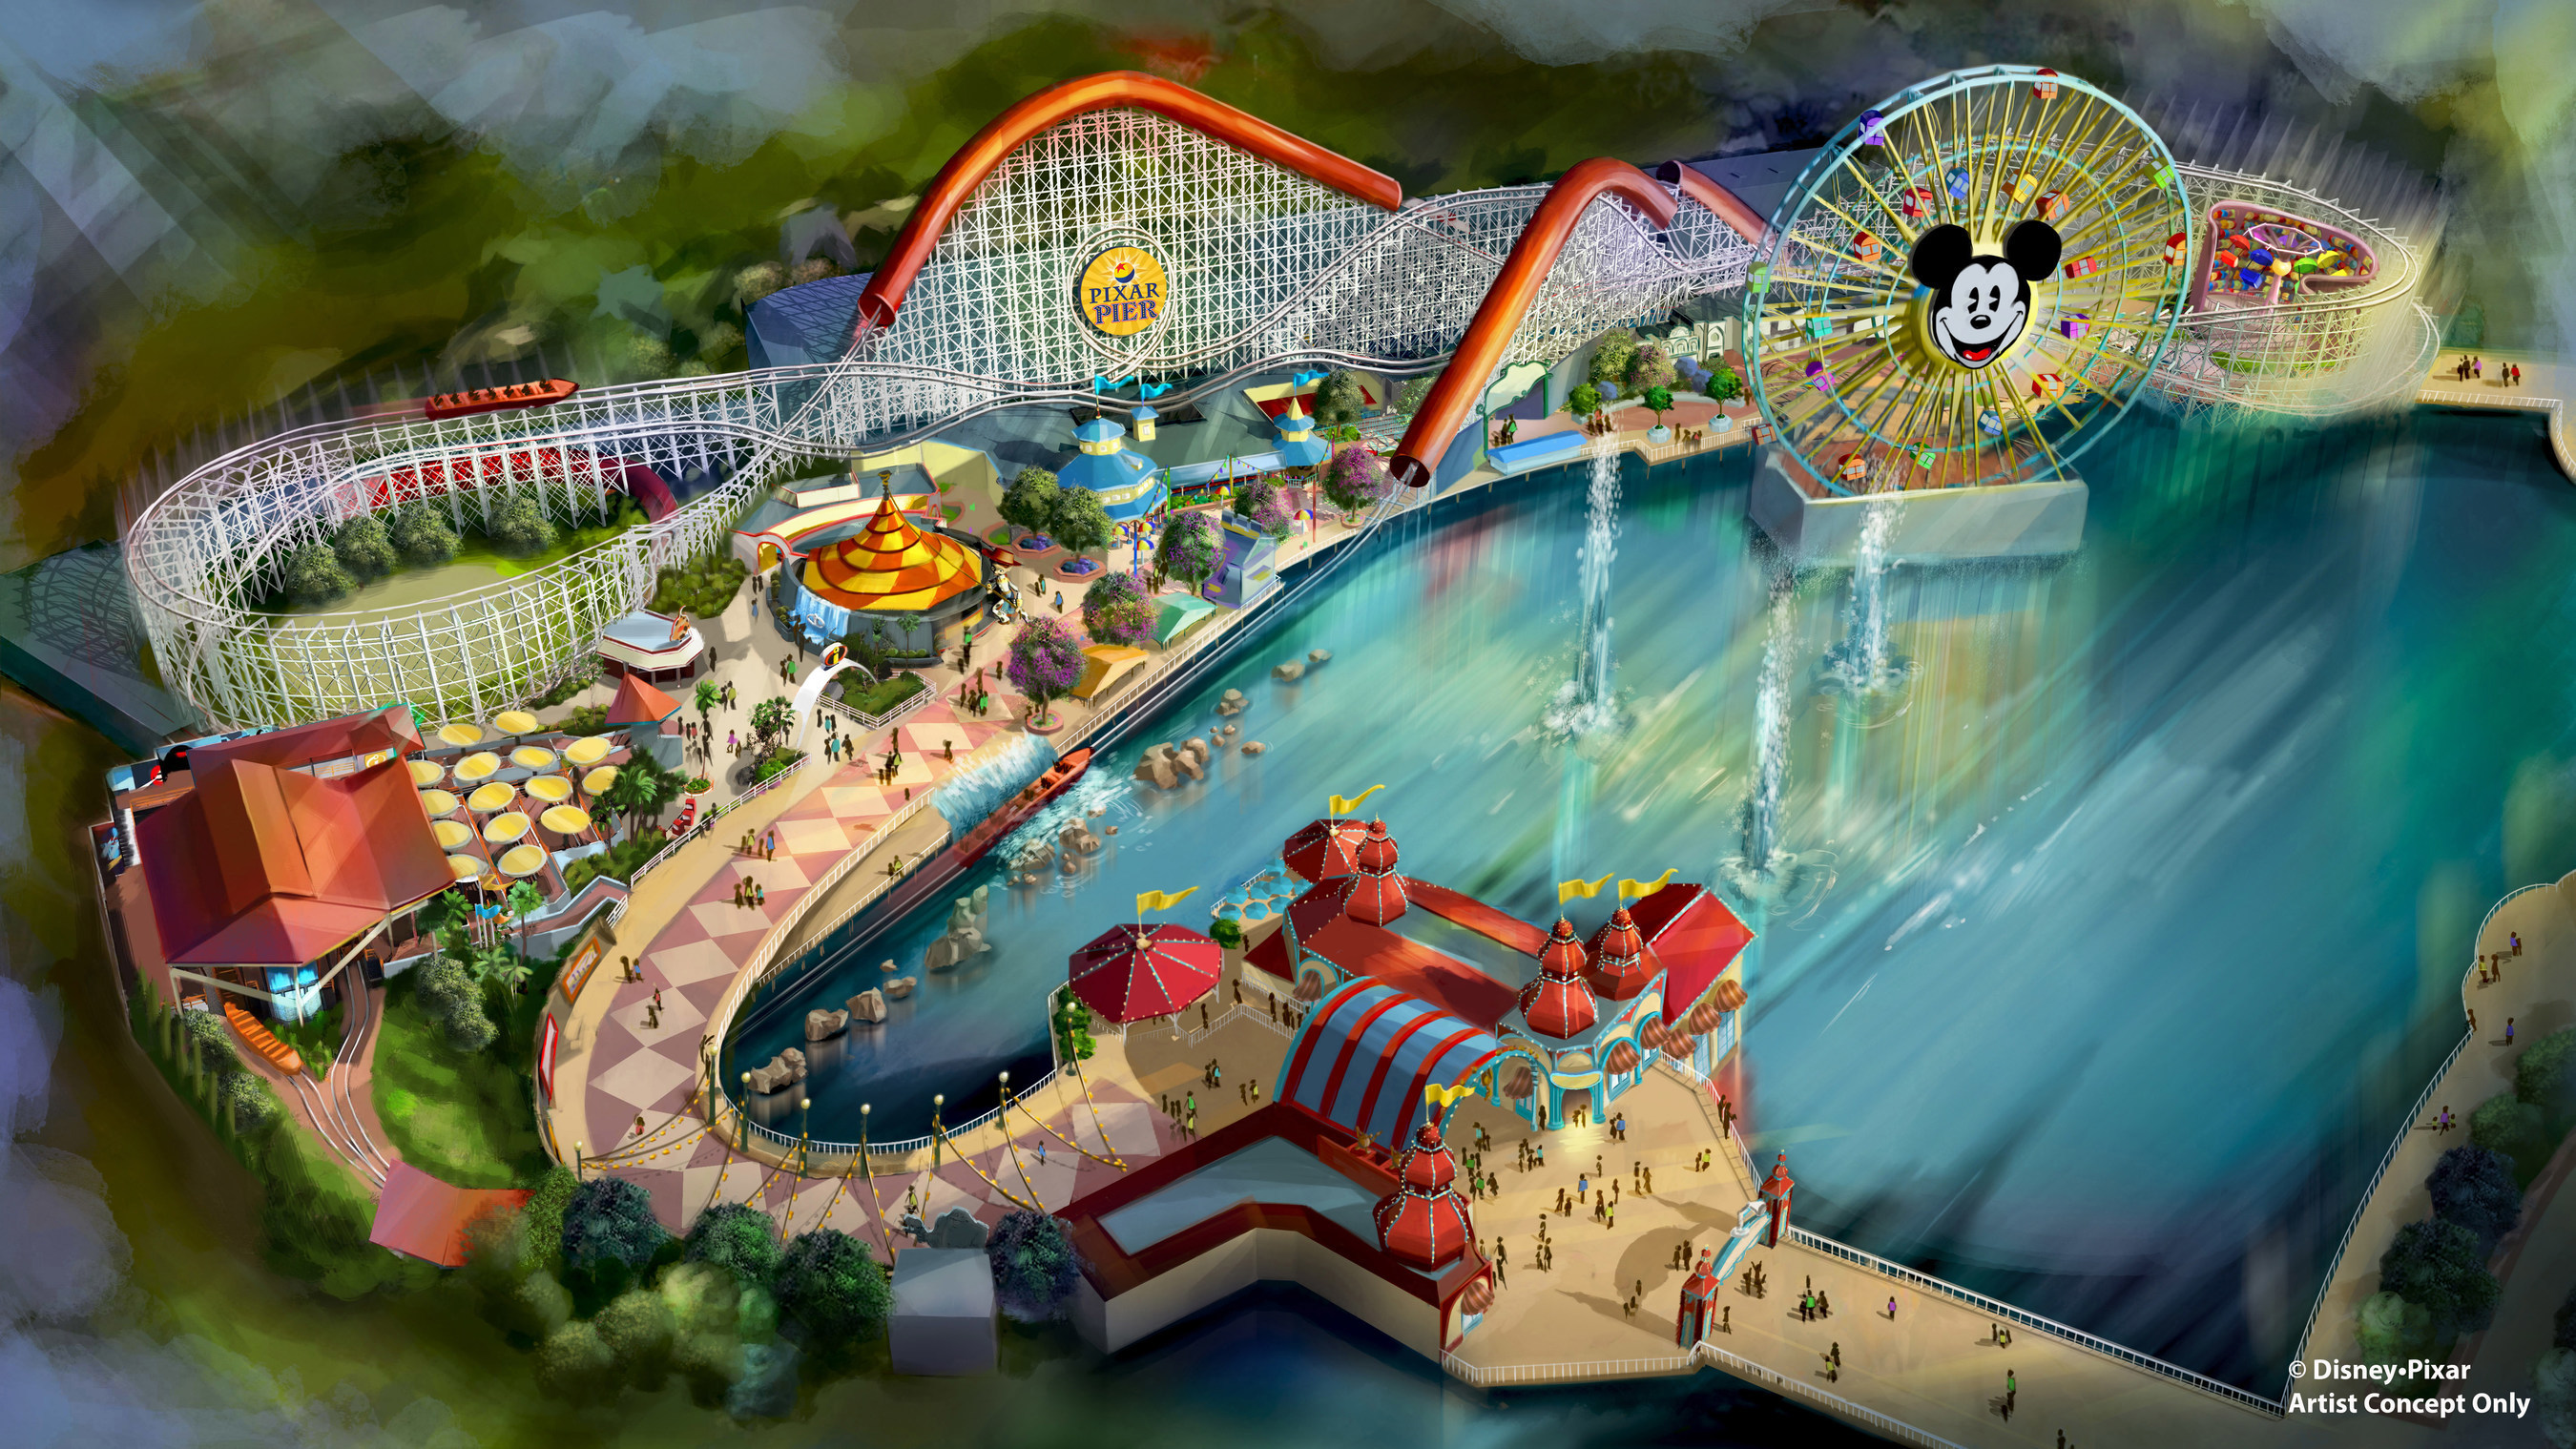 Pixar Pier Opens In Summer 2018 With New Incredicoaster Inspired By The Incredibles At Disney California Adventure Park - disneys v square downtown disney roblox